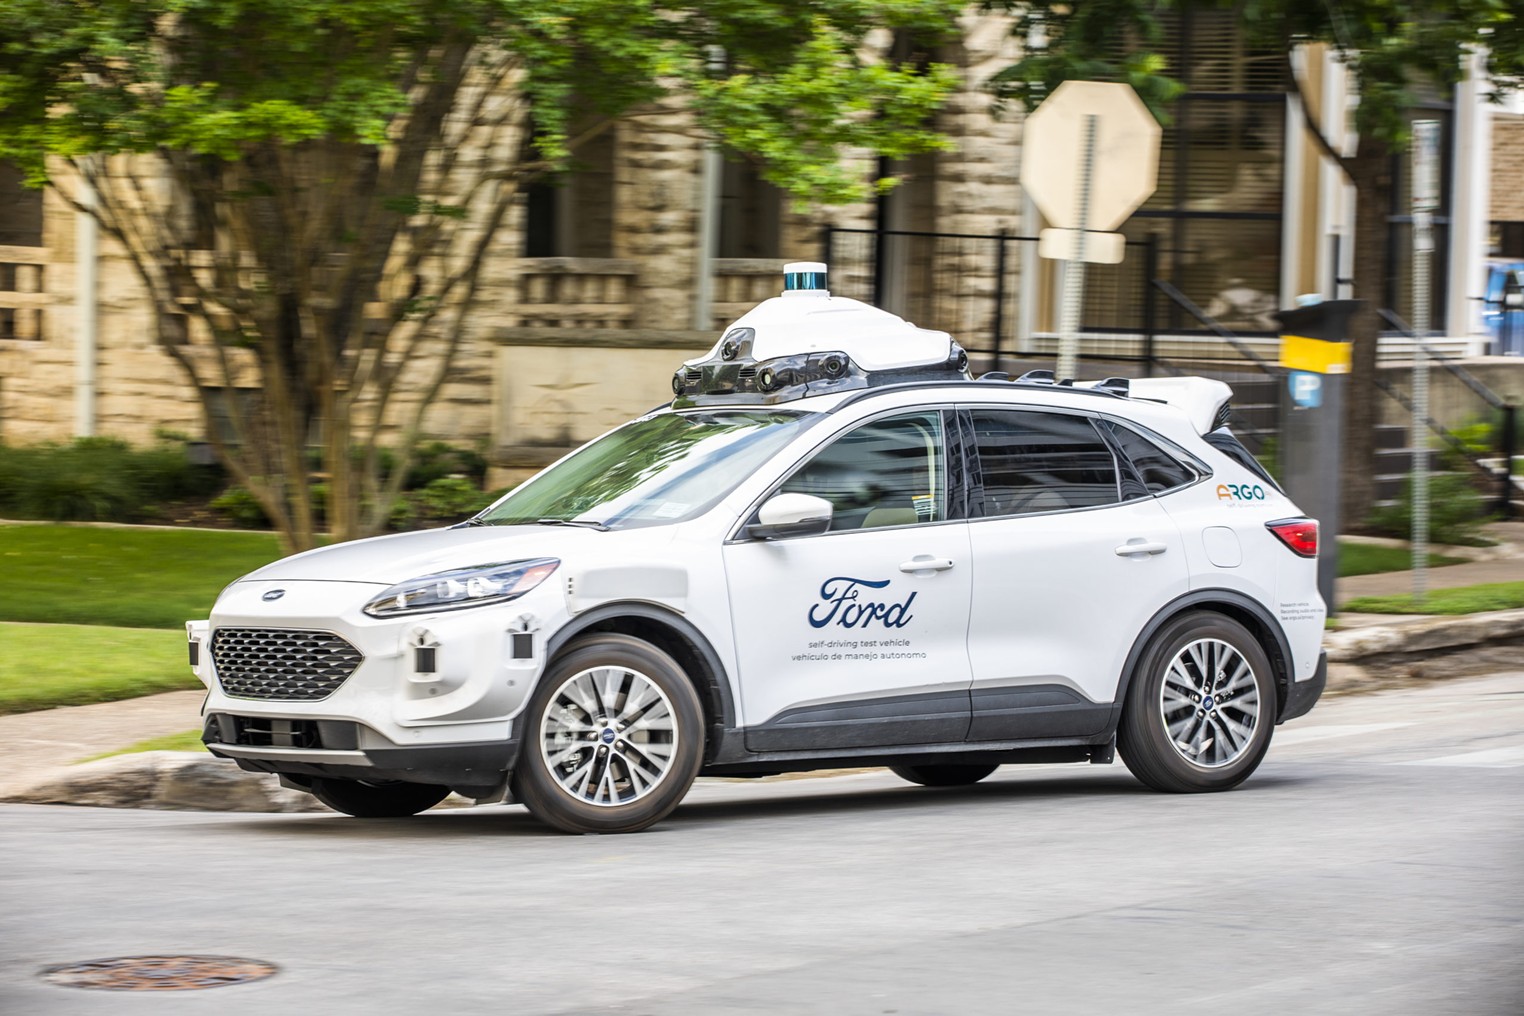 Miami's First Fleet of Driverless Cars Hits the Streets